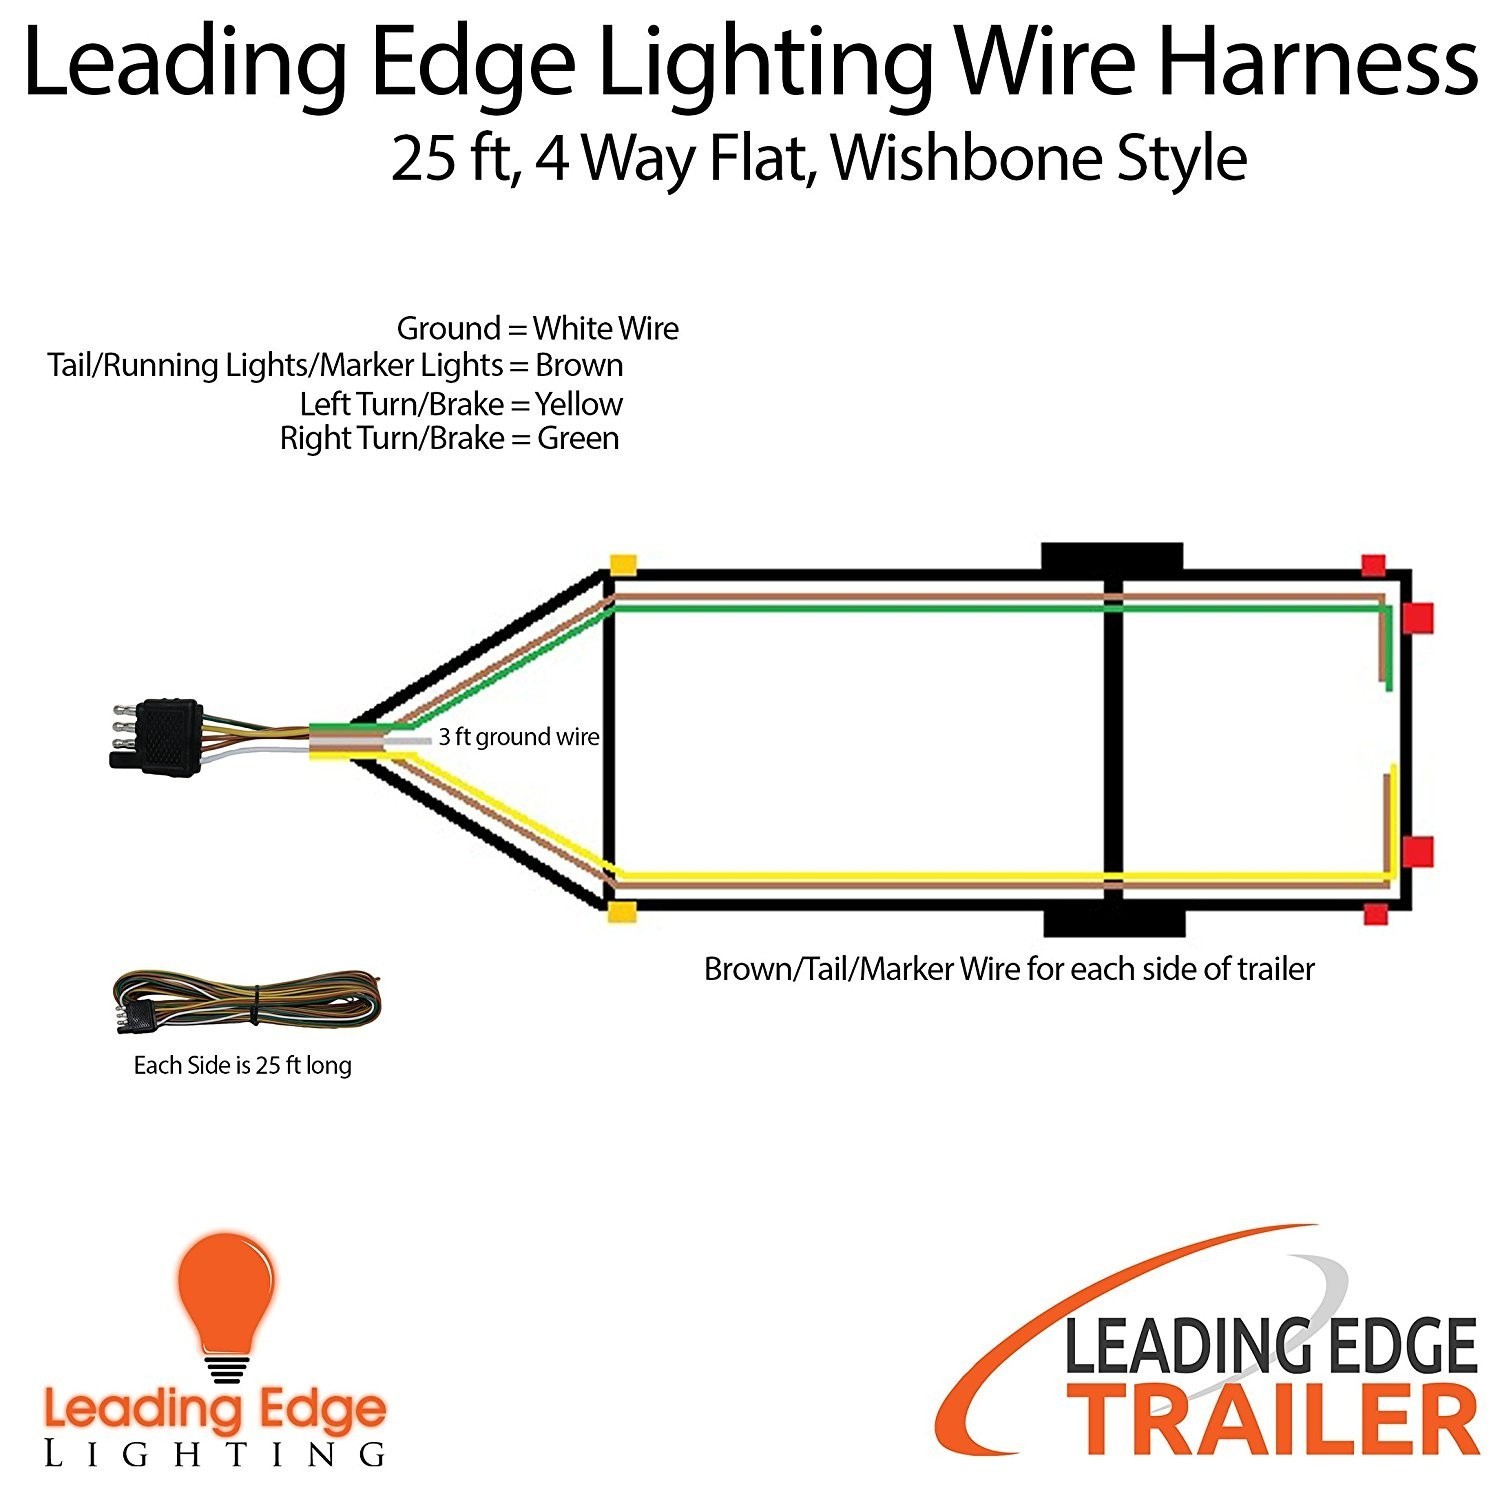 Wiring Diagram for Trailer Harness Valid Wiring Diagram Rv 7 Way Plug Refrence Wiring Diagram for